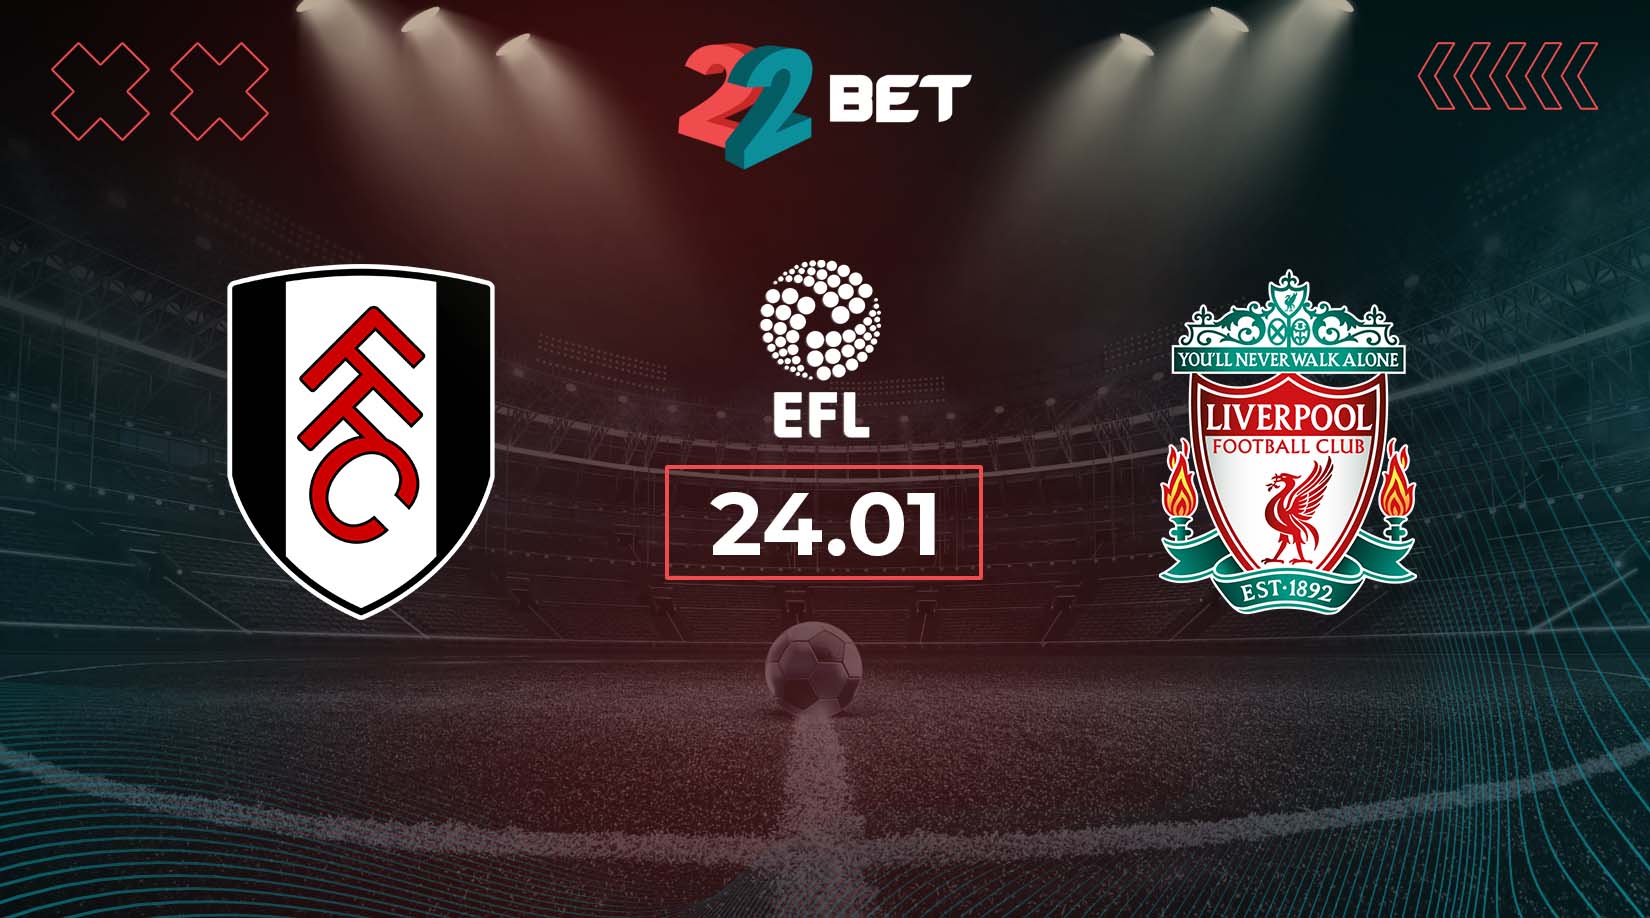 Fulham vs Liverpool Prediction: EFL Cup Match on 24.02.2023